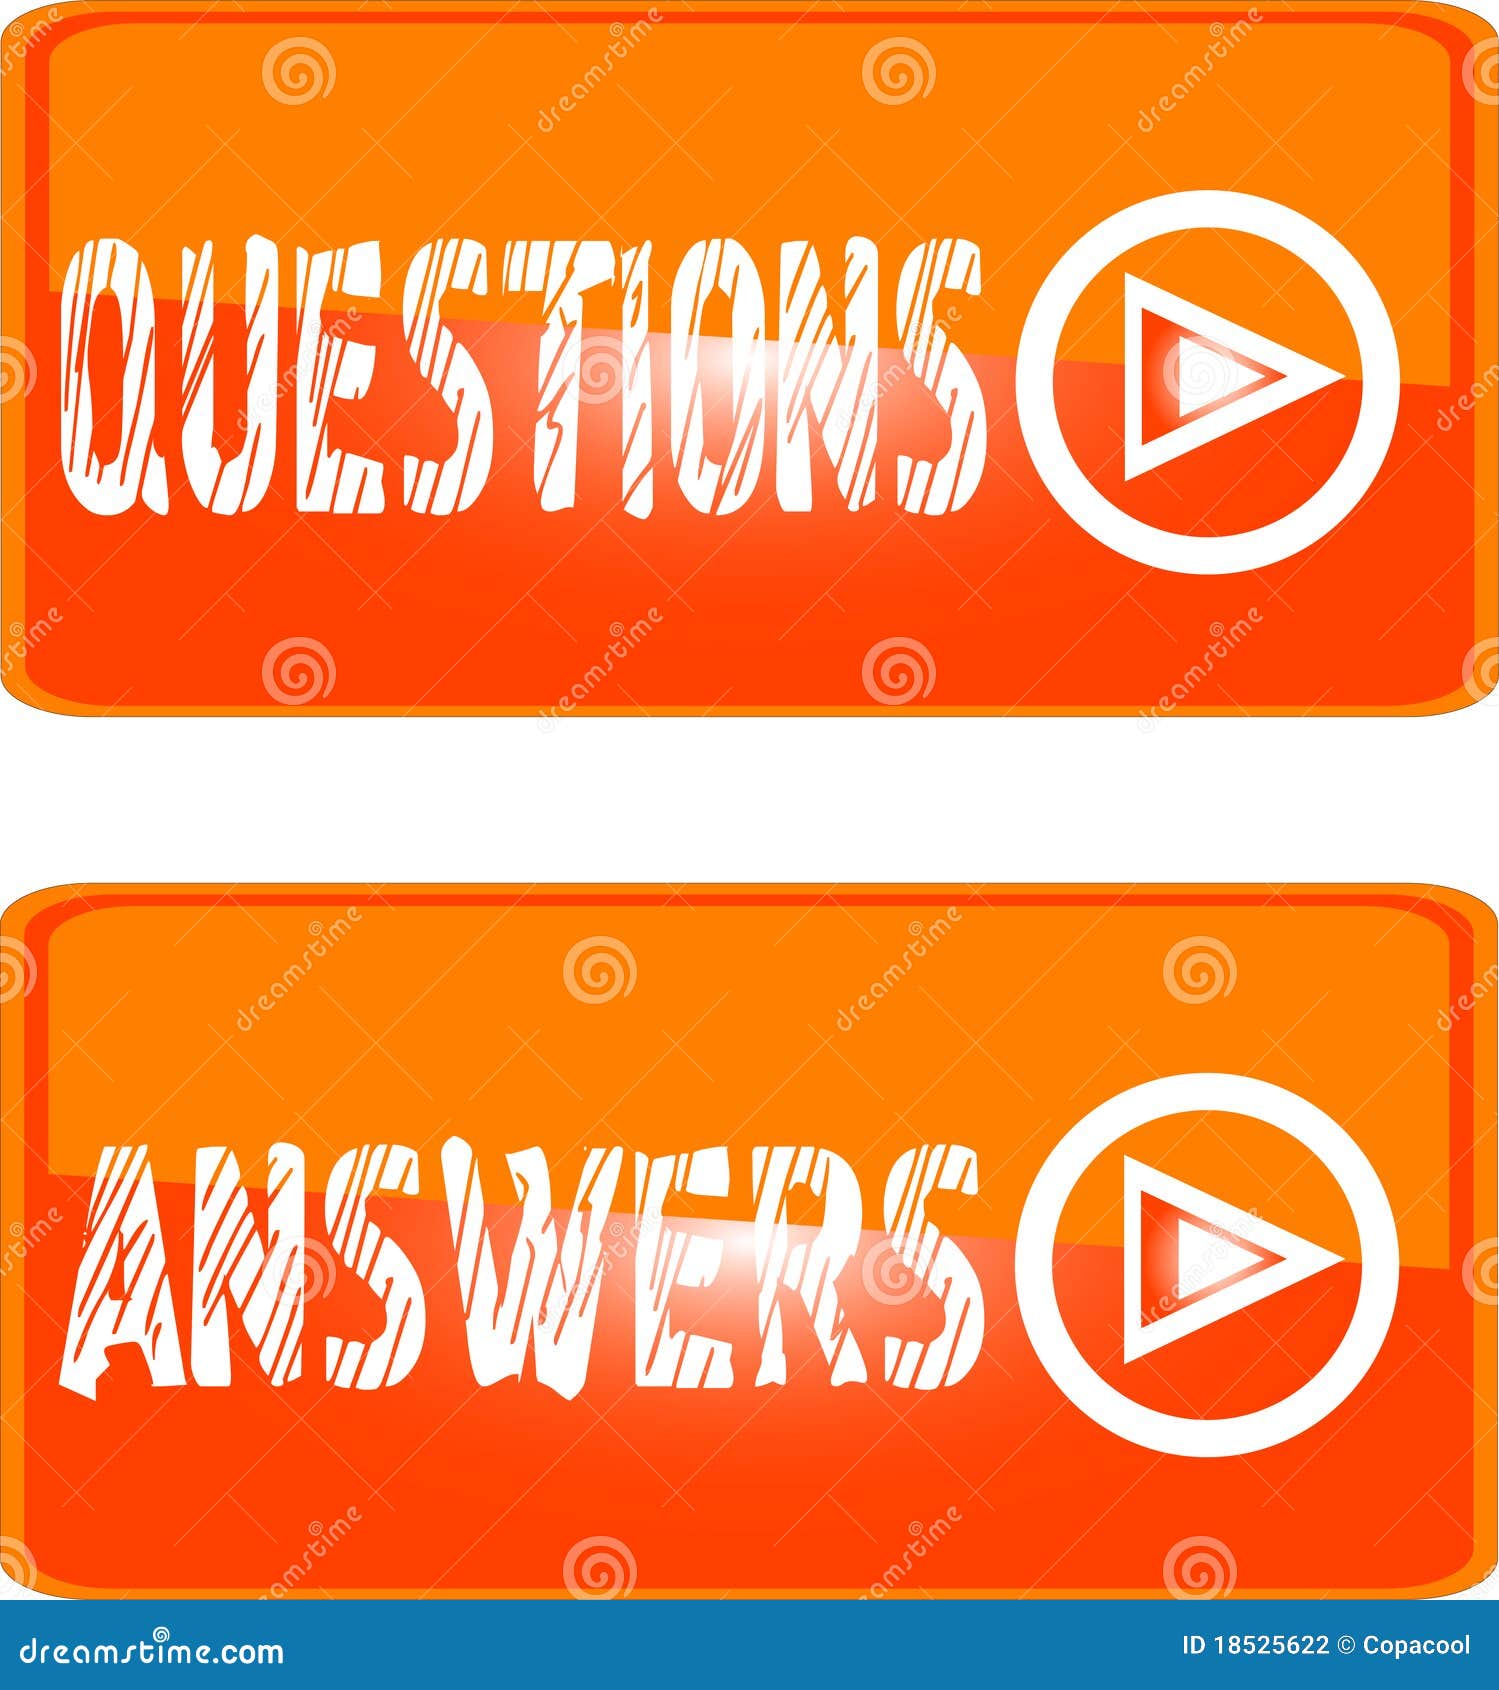 questions and answers quotes